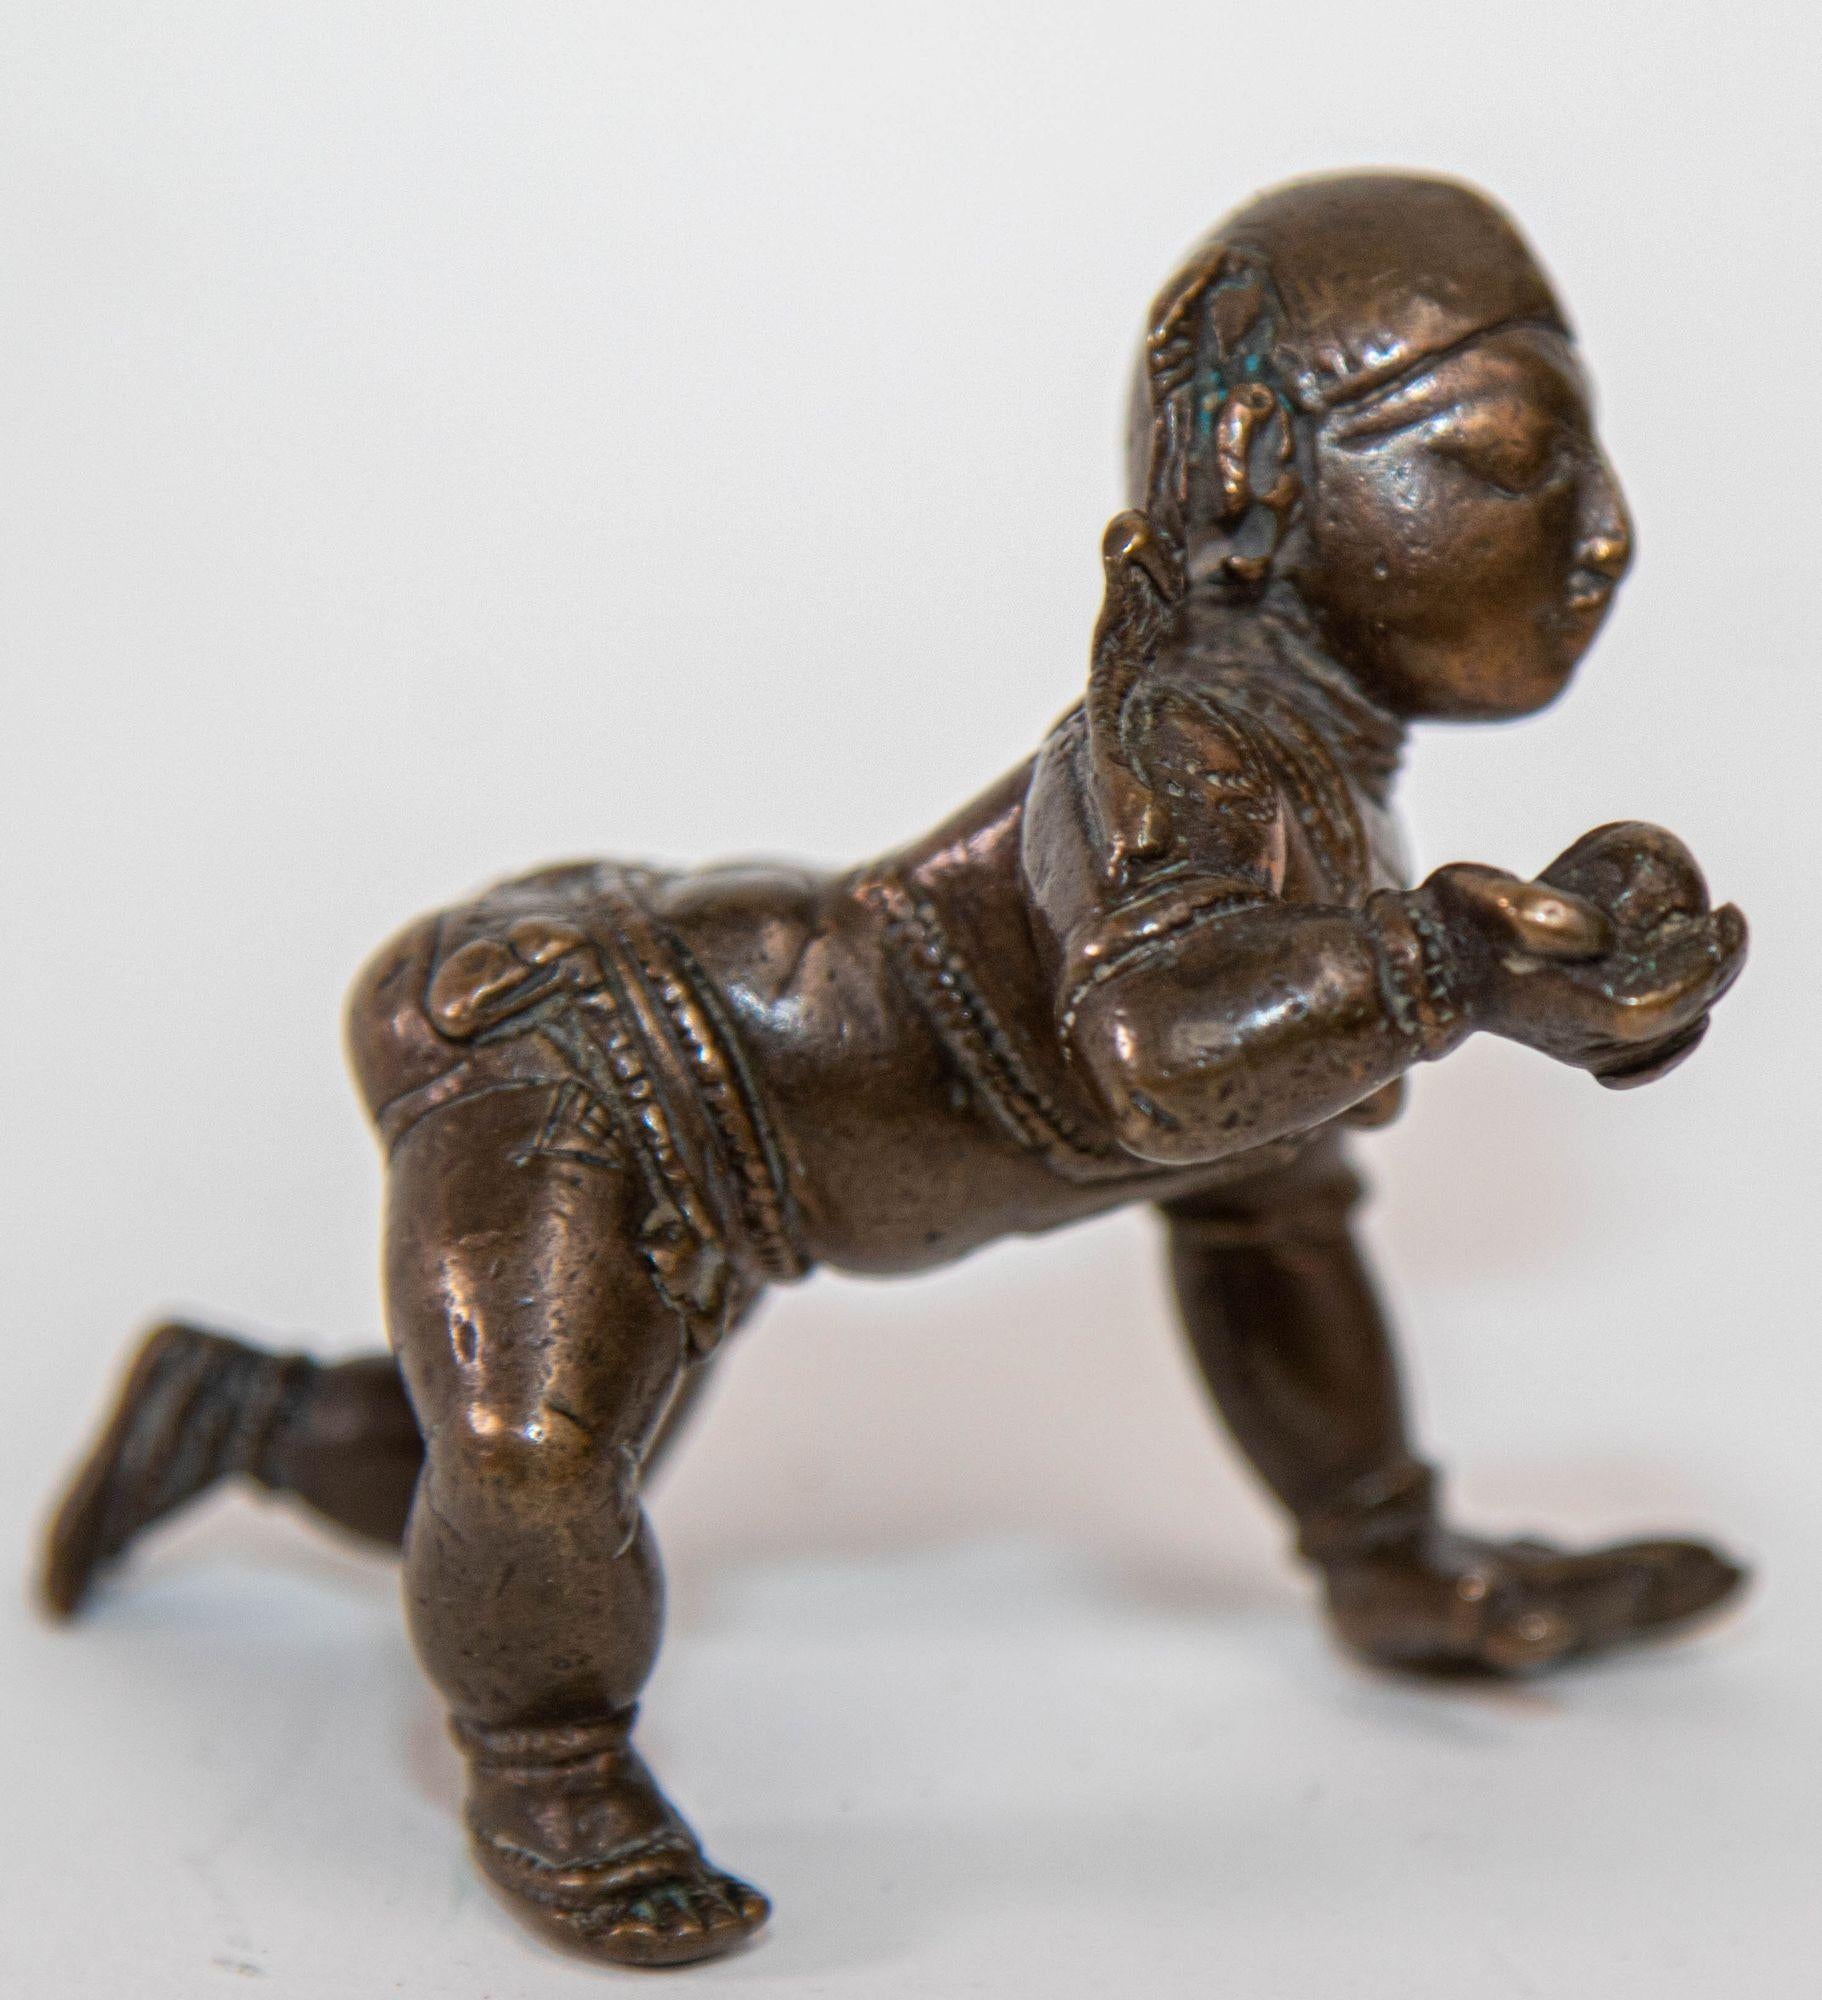 Antique bronze figure of Baby Bala Krishna crawling figure holding the pearl of wisdom or butterball.

An Indian Bronze Figure of Balakrishna, the baby Krishna wearing chains around his waist and a necklace, his face with a humorous expression,